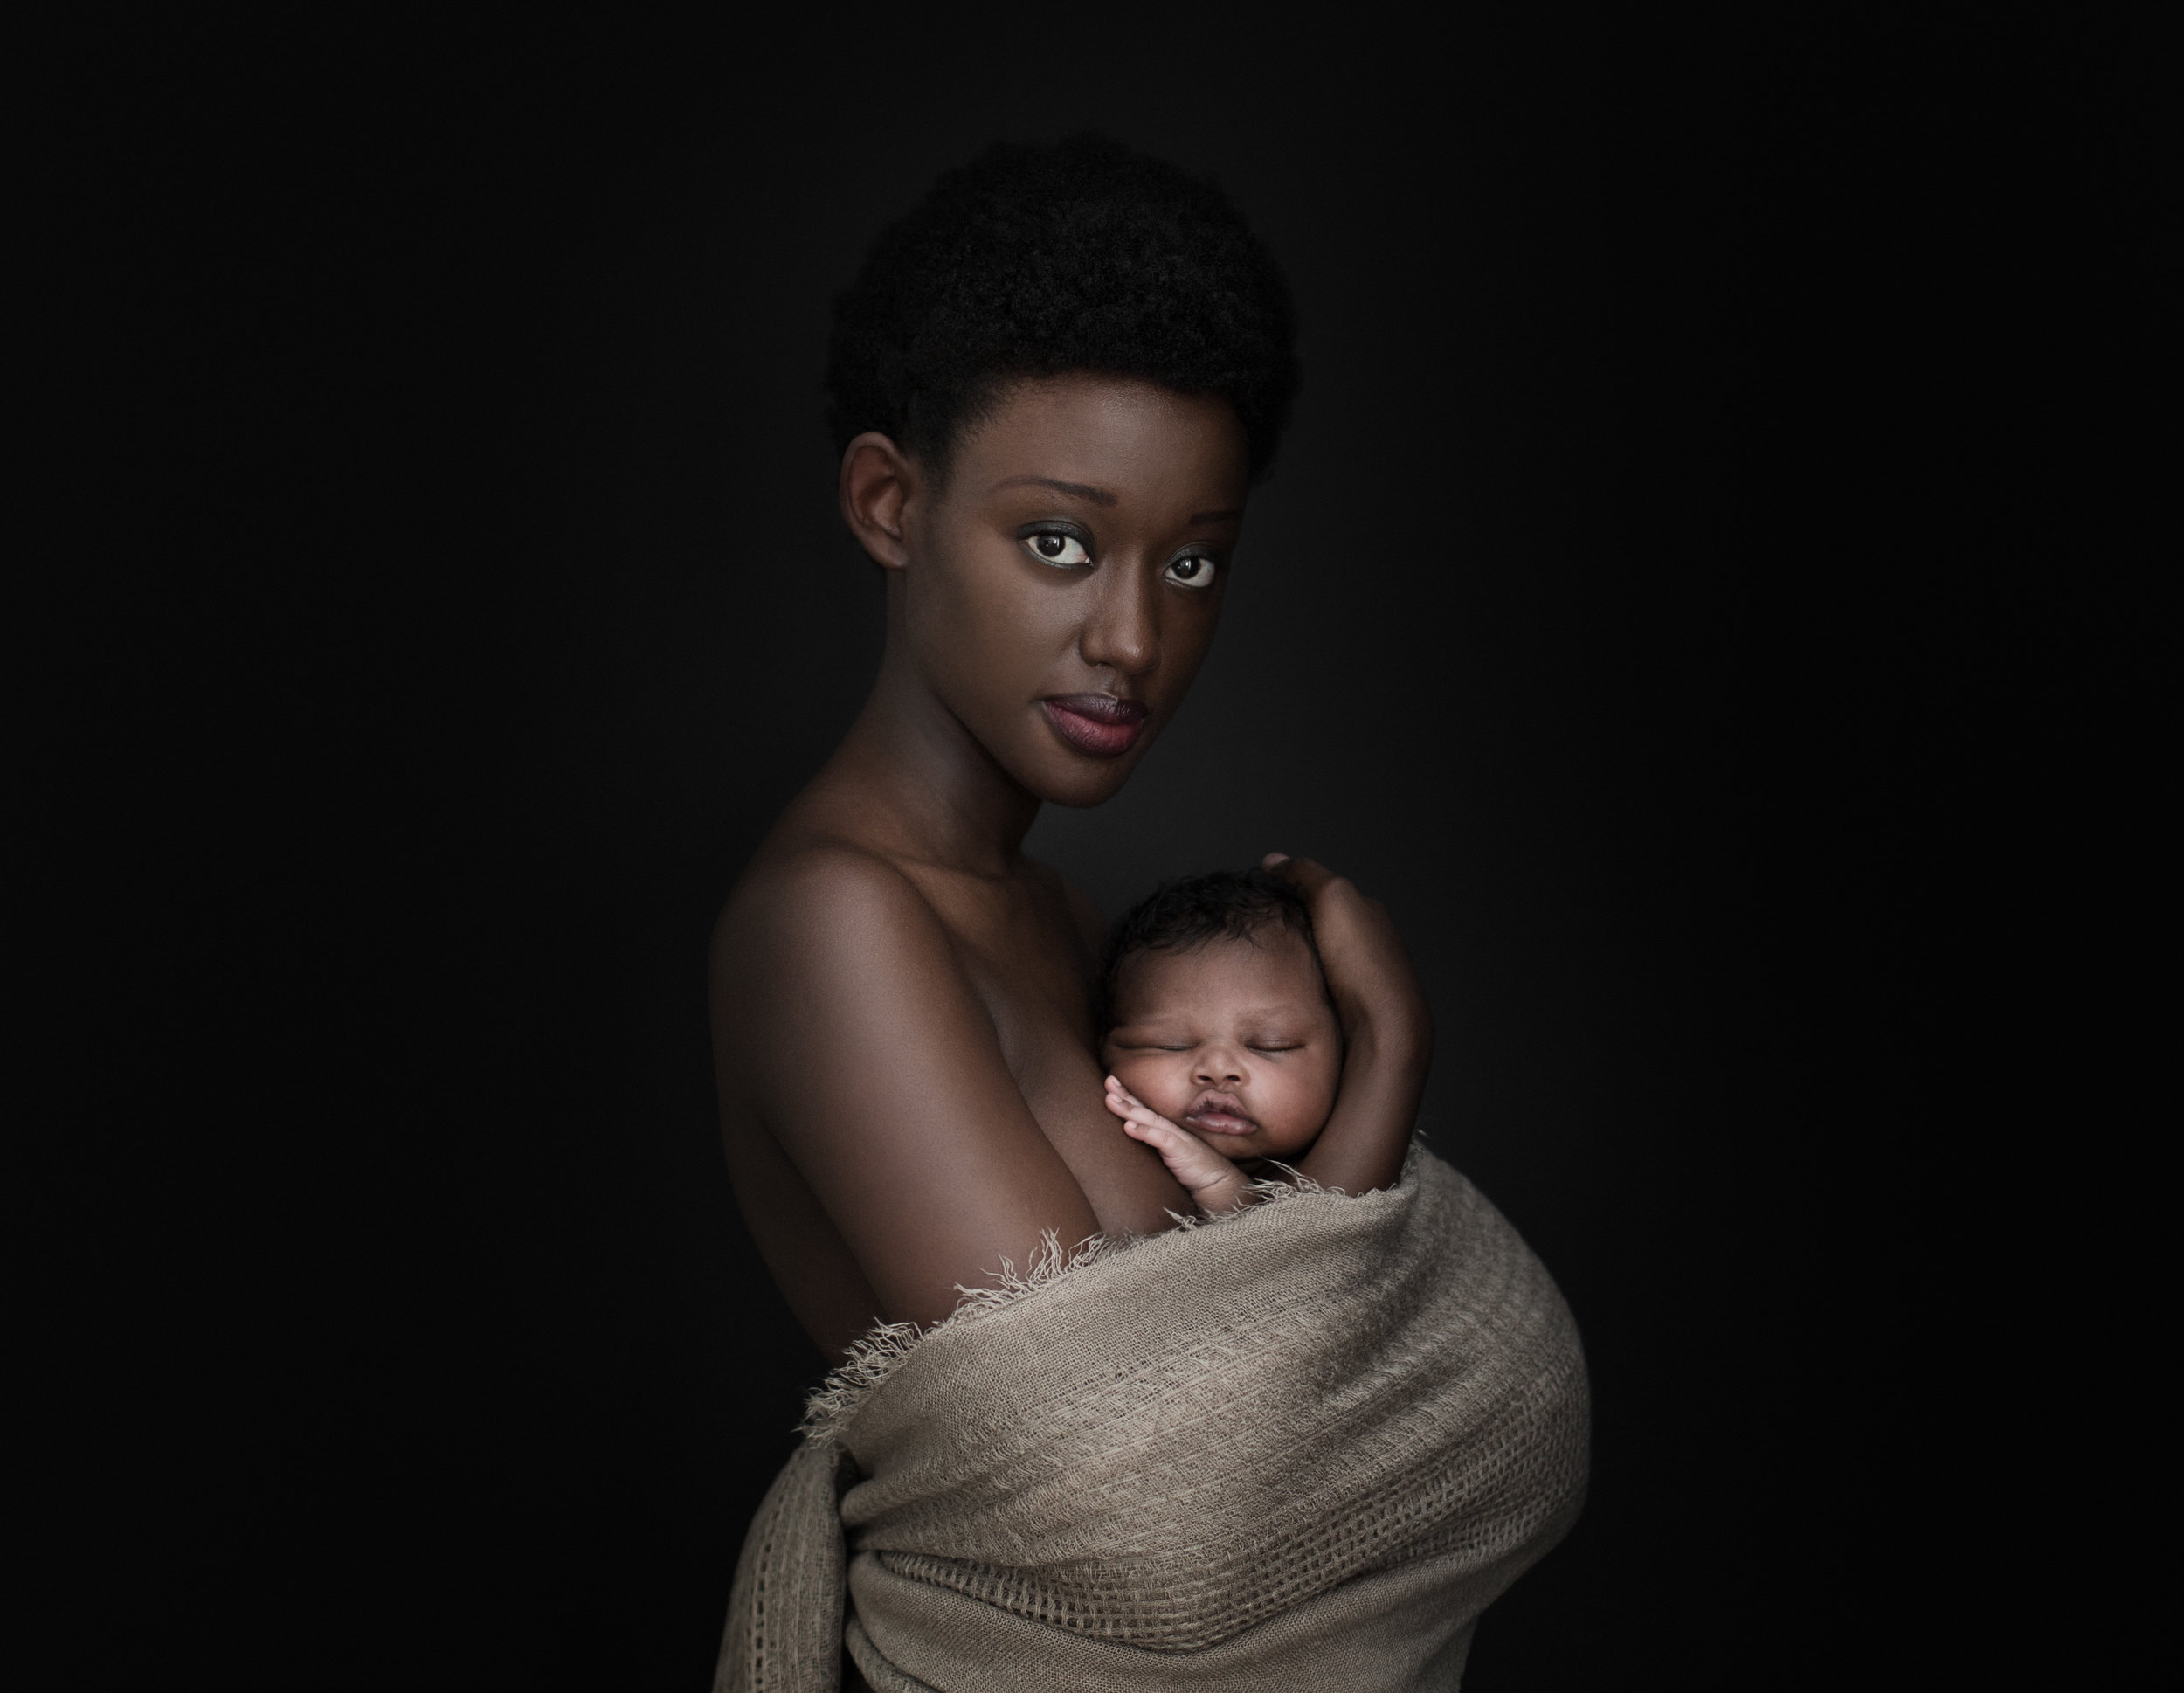 Stunning portrait of Mother and Baby captured by NYC newborn photographer Lola Melani